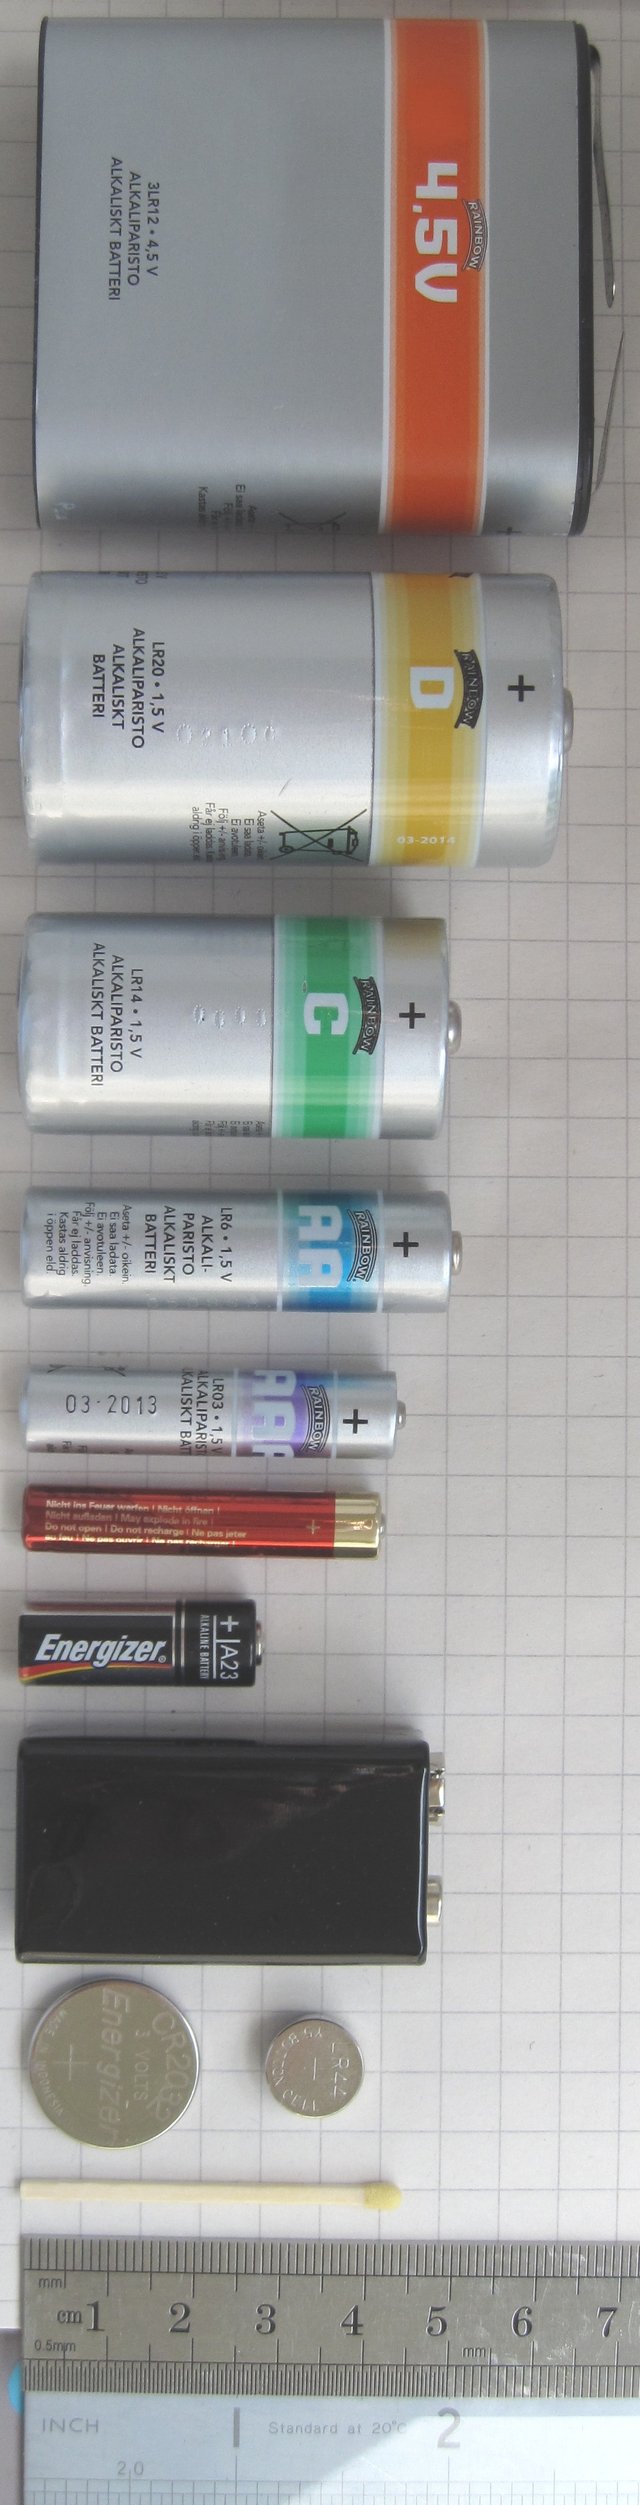 From top to bottom: a large 4.5-volt (3R12) battery, a D Cell, a C cell, an AA cell, an AAA cell, an AAAA cell, an A23 battery, a 9-volt PP3 battery, and a pair of button cells (CR2032 and LR44)